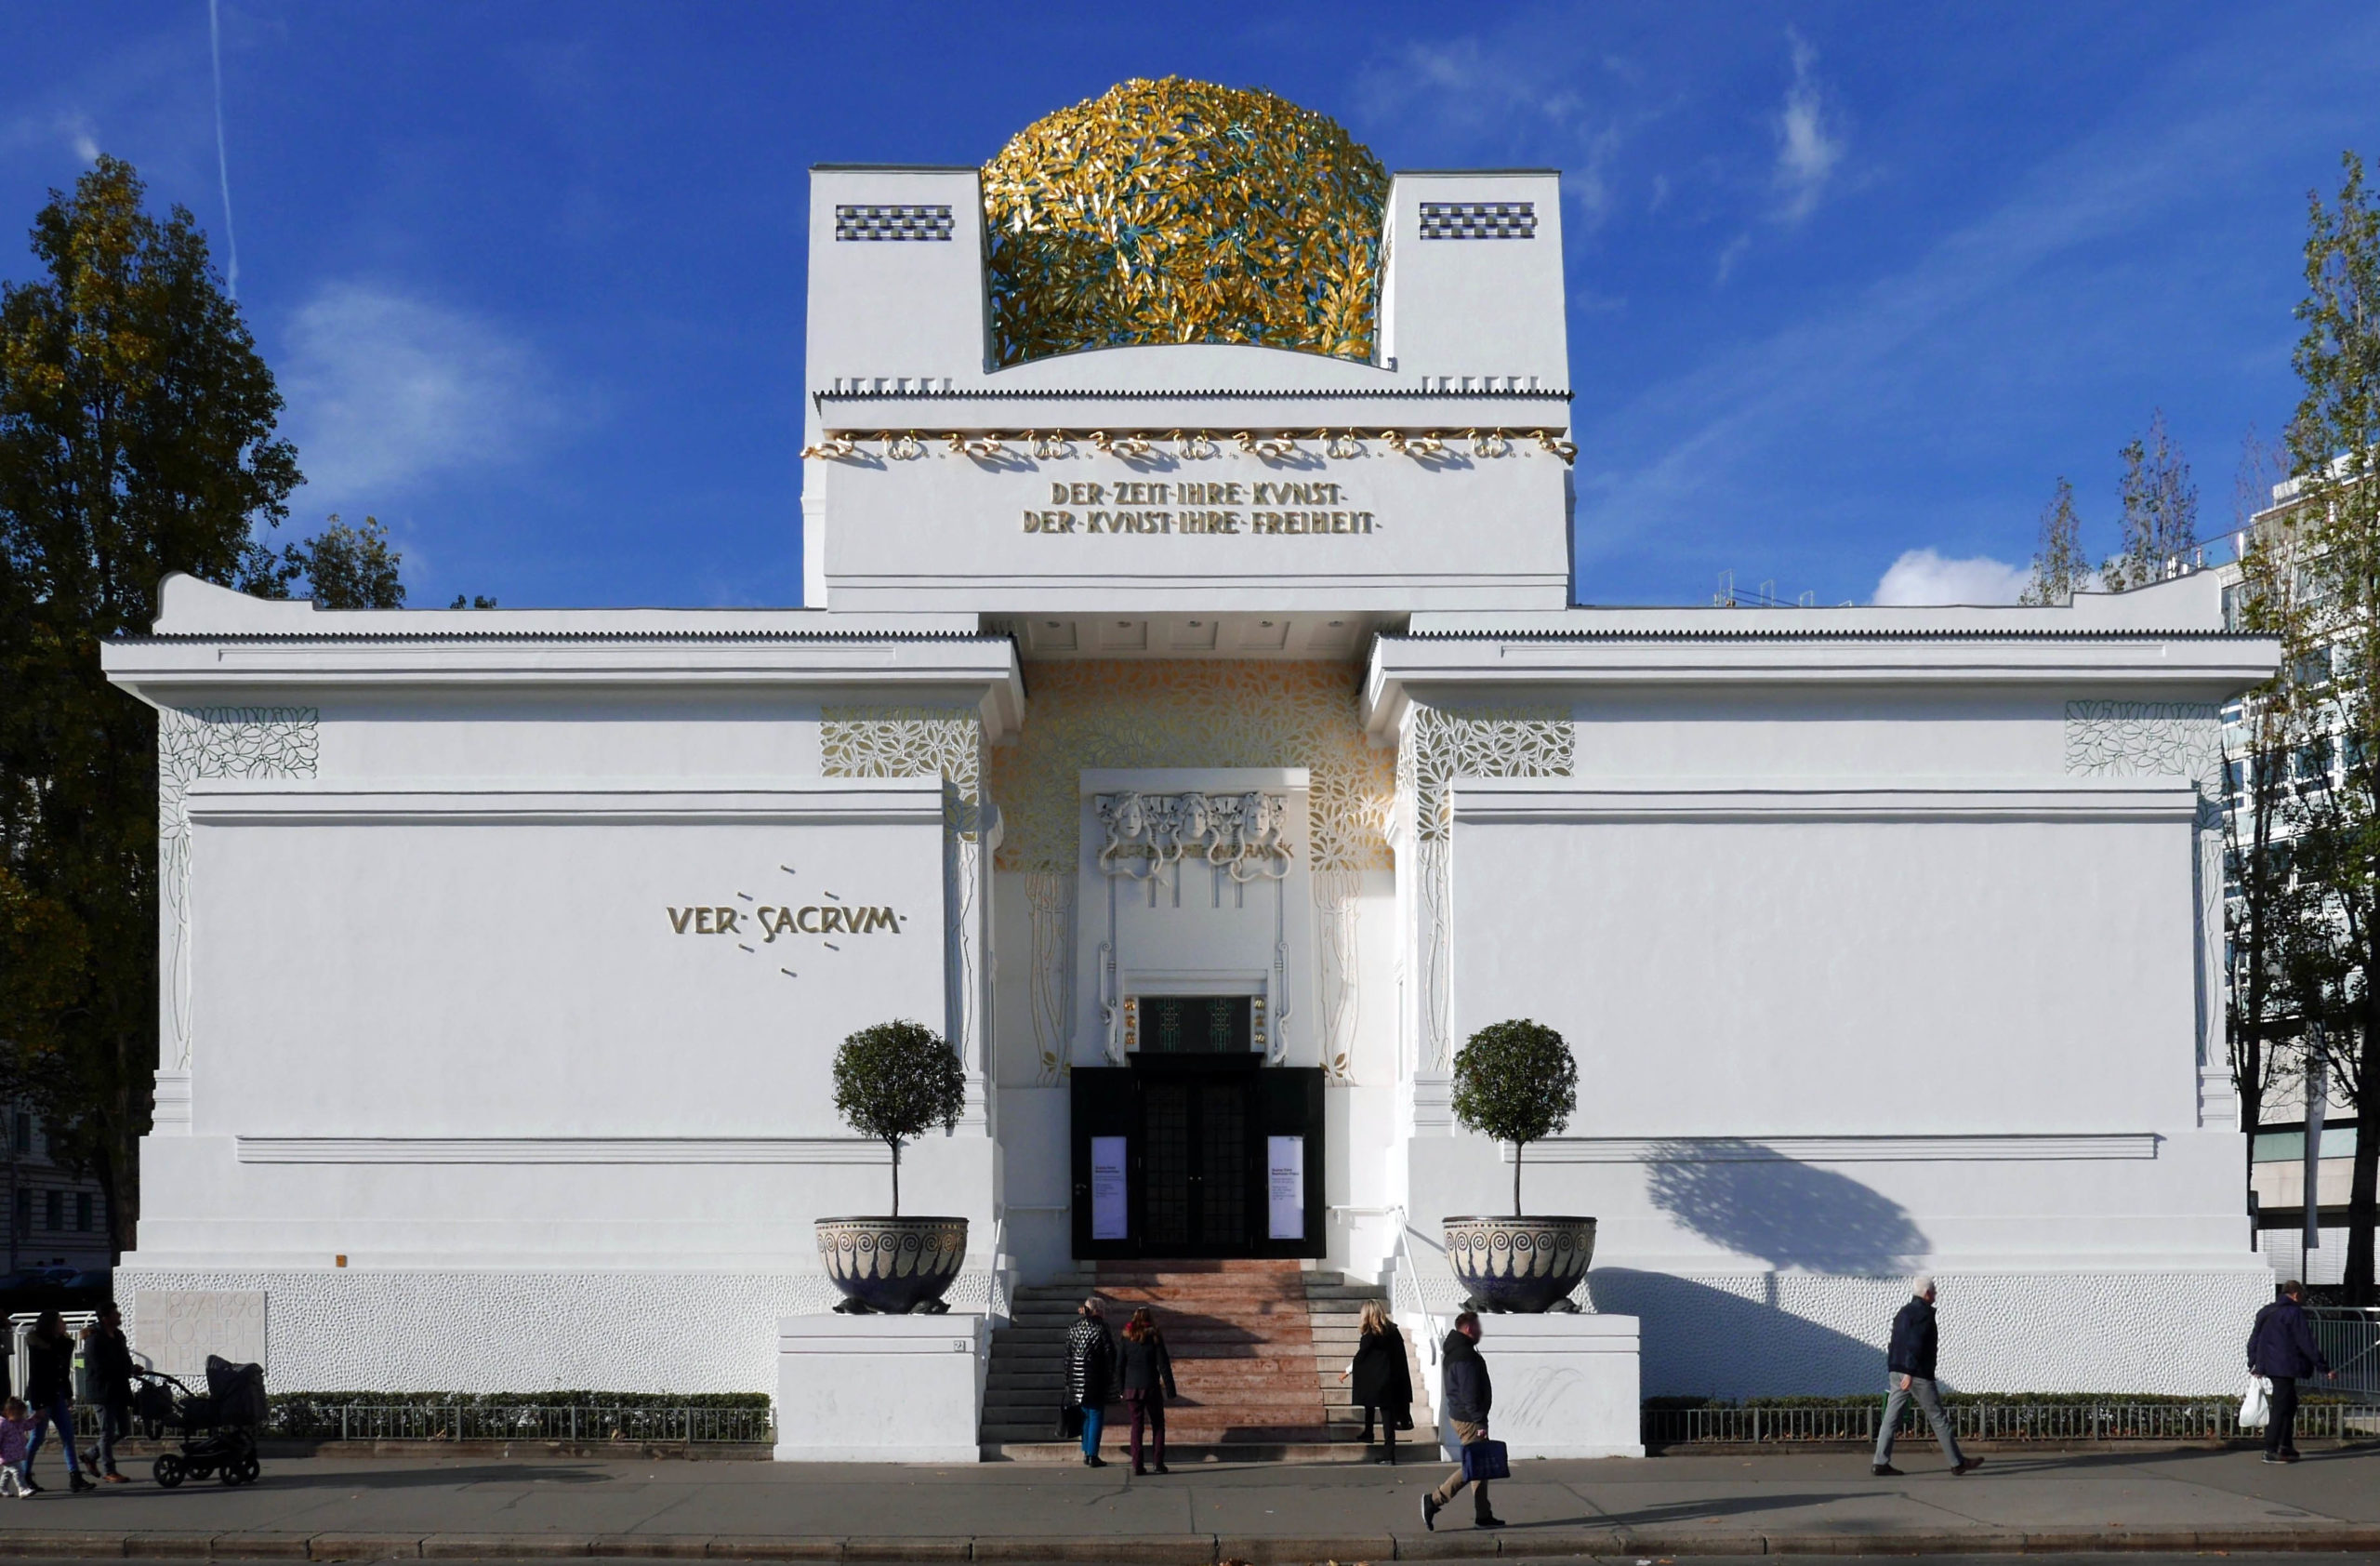 Olbrich Secession facade John Lord BY 2.0 https://flic.kr/p/QLteTs